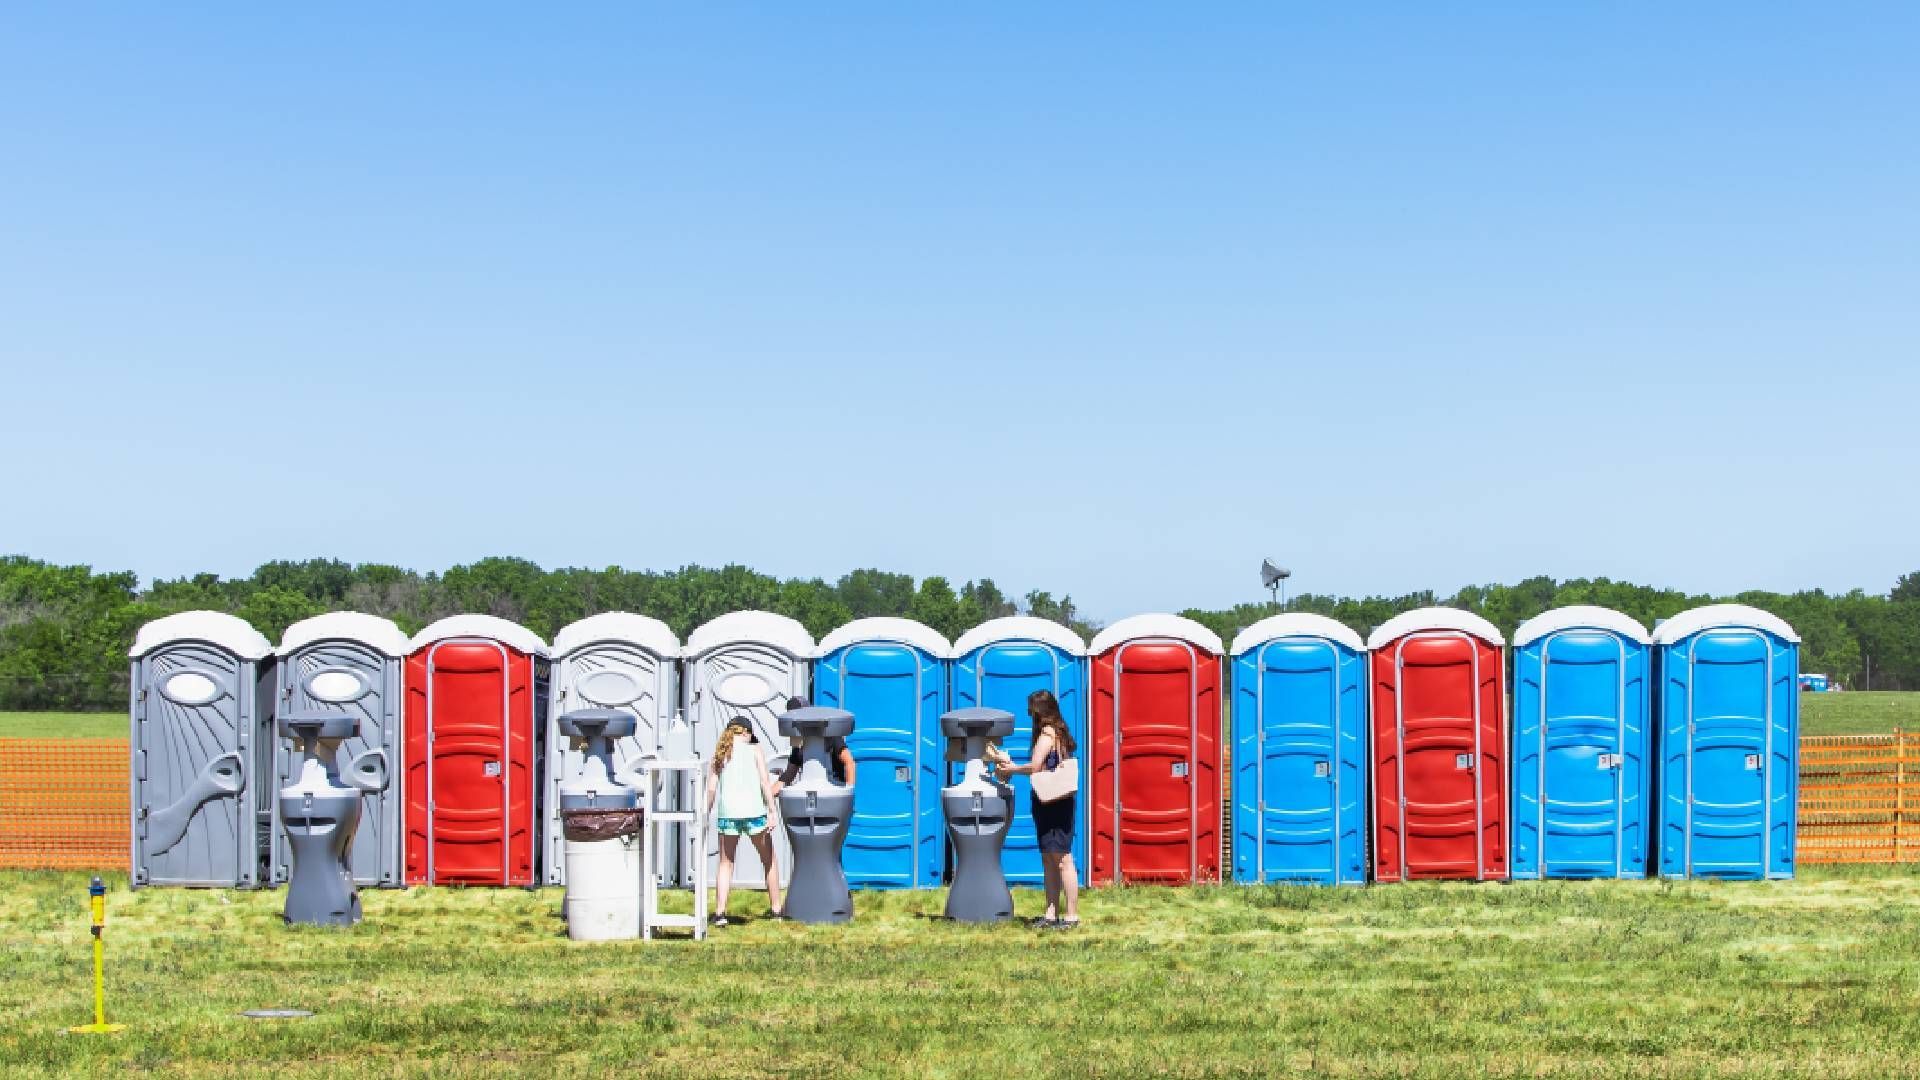 Attendees at an outdoor event using portable washrooms and handwash stations near Lexington, Kentuck